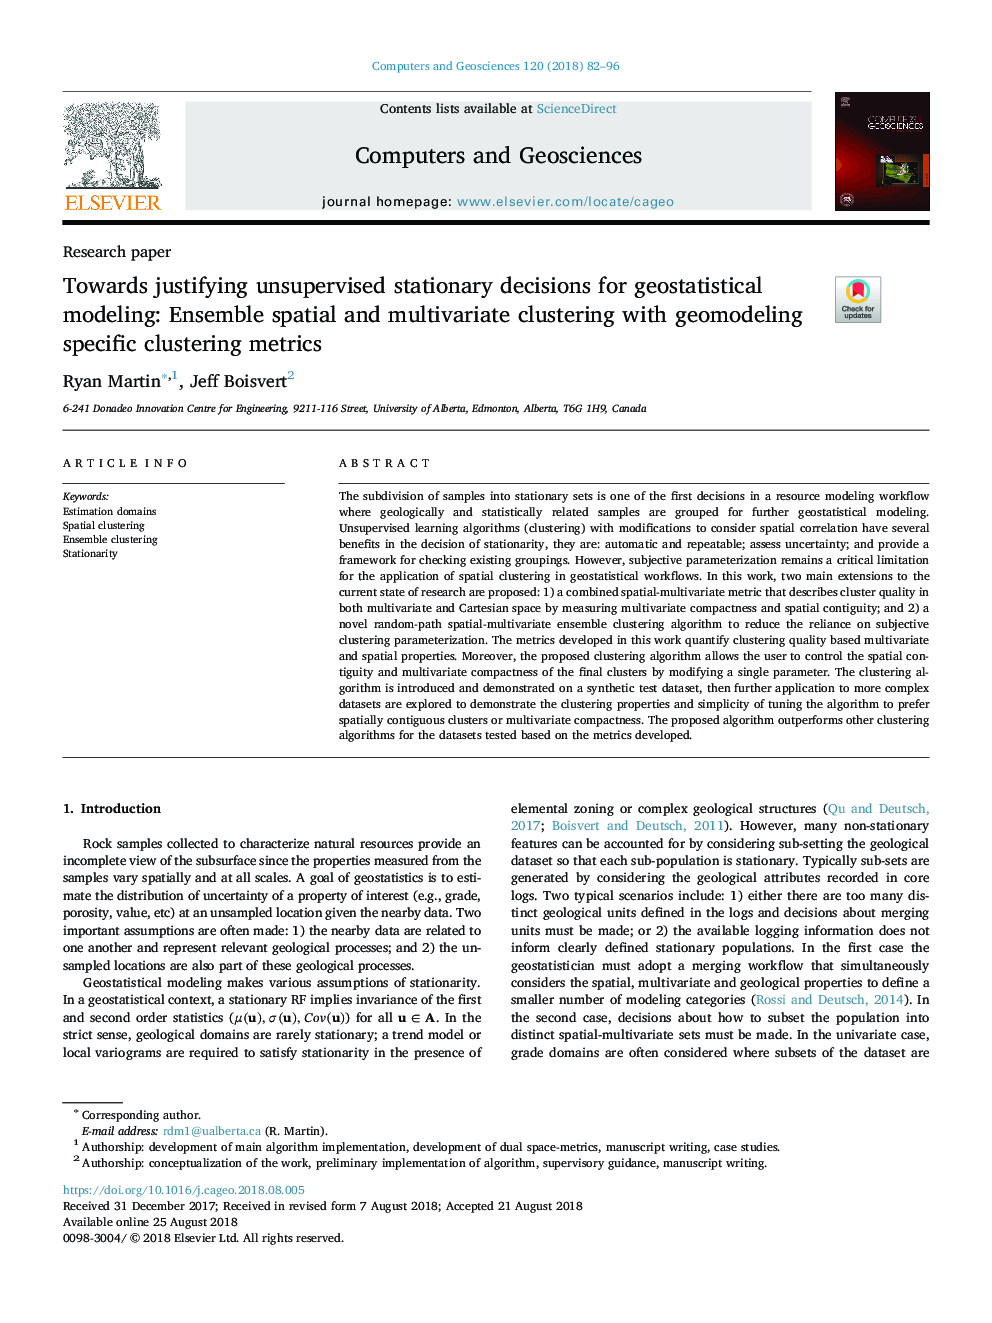 Towards justifying unsupervised stationary decisions for geostatistical modeling: Ensemble spatial and multivariate clustering with geomodeling specific clustering metrics